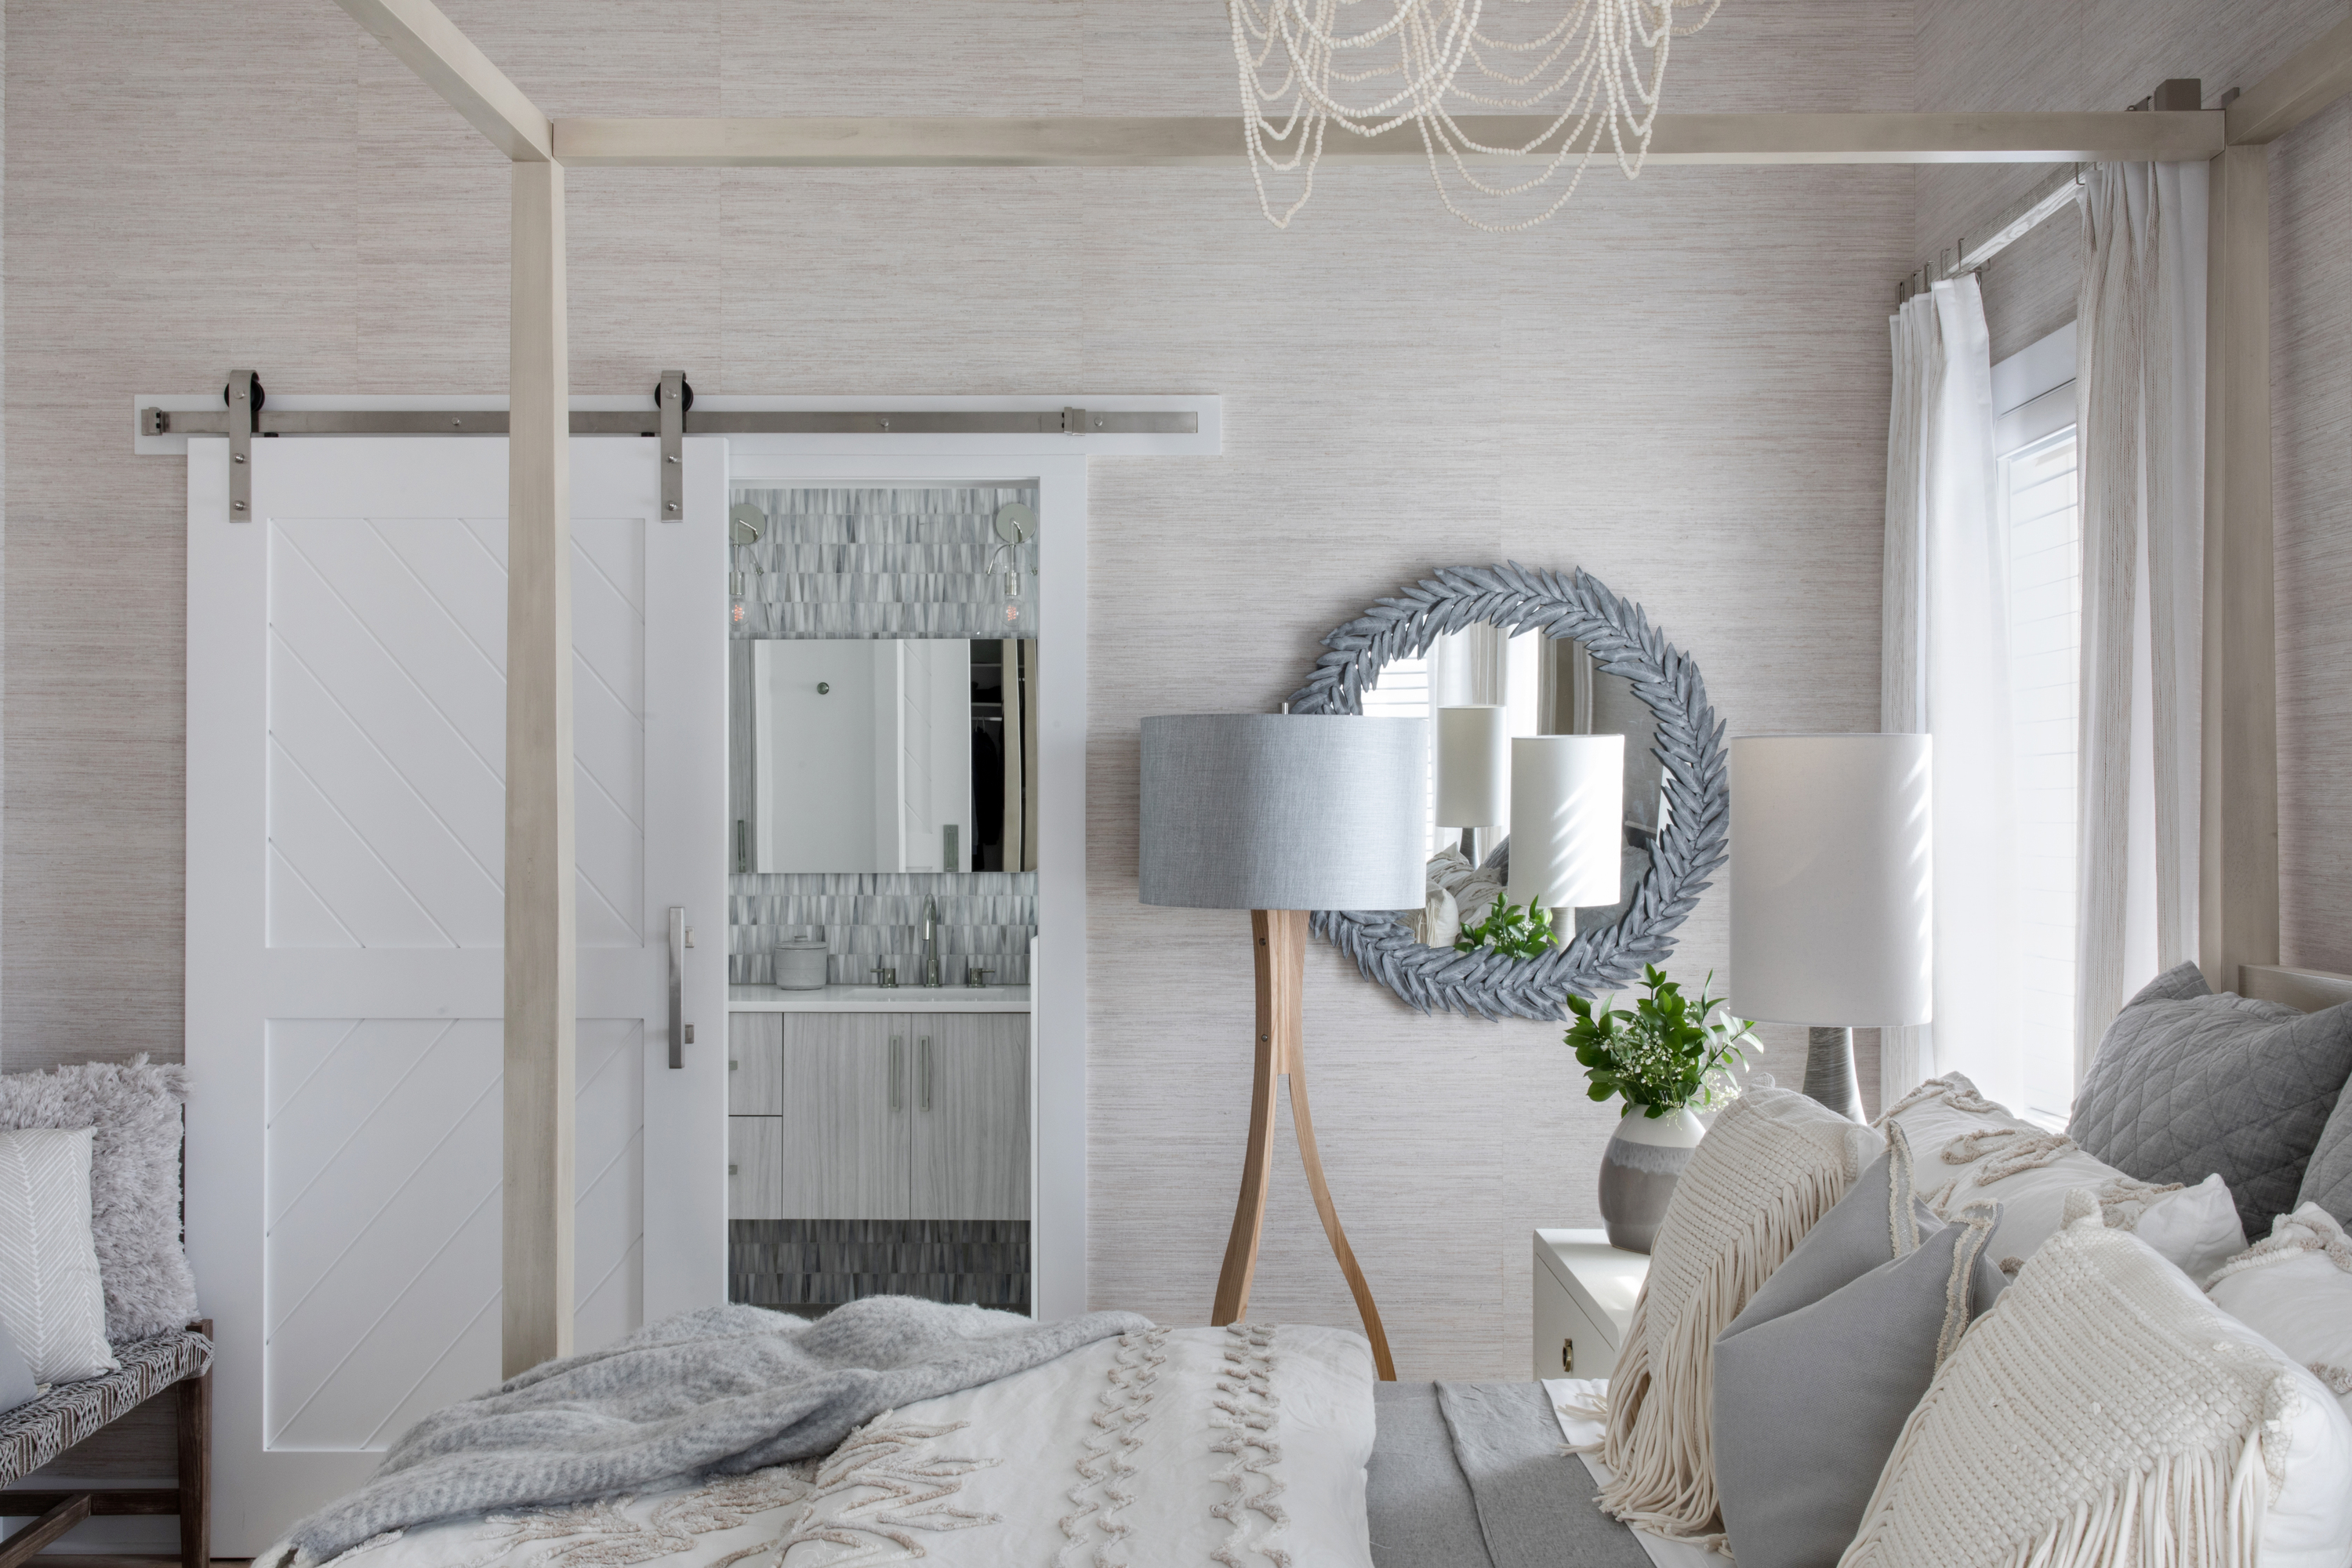 bedroom mirror ideas – 12 ways to amplify light and space | livingetc